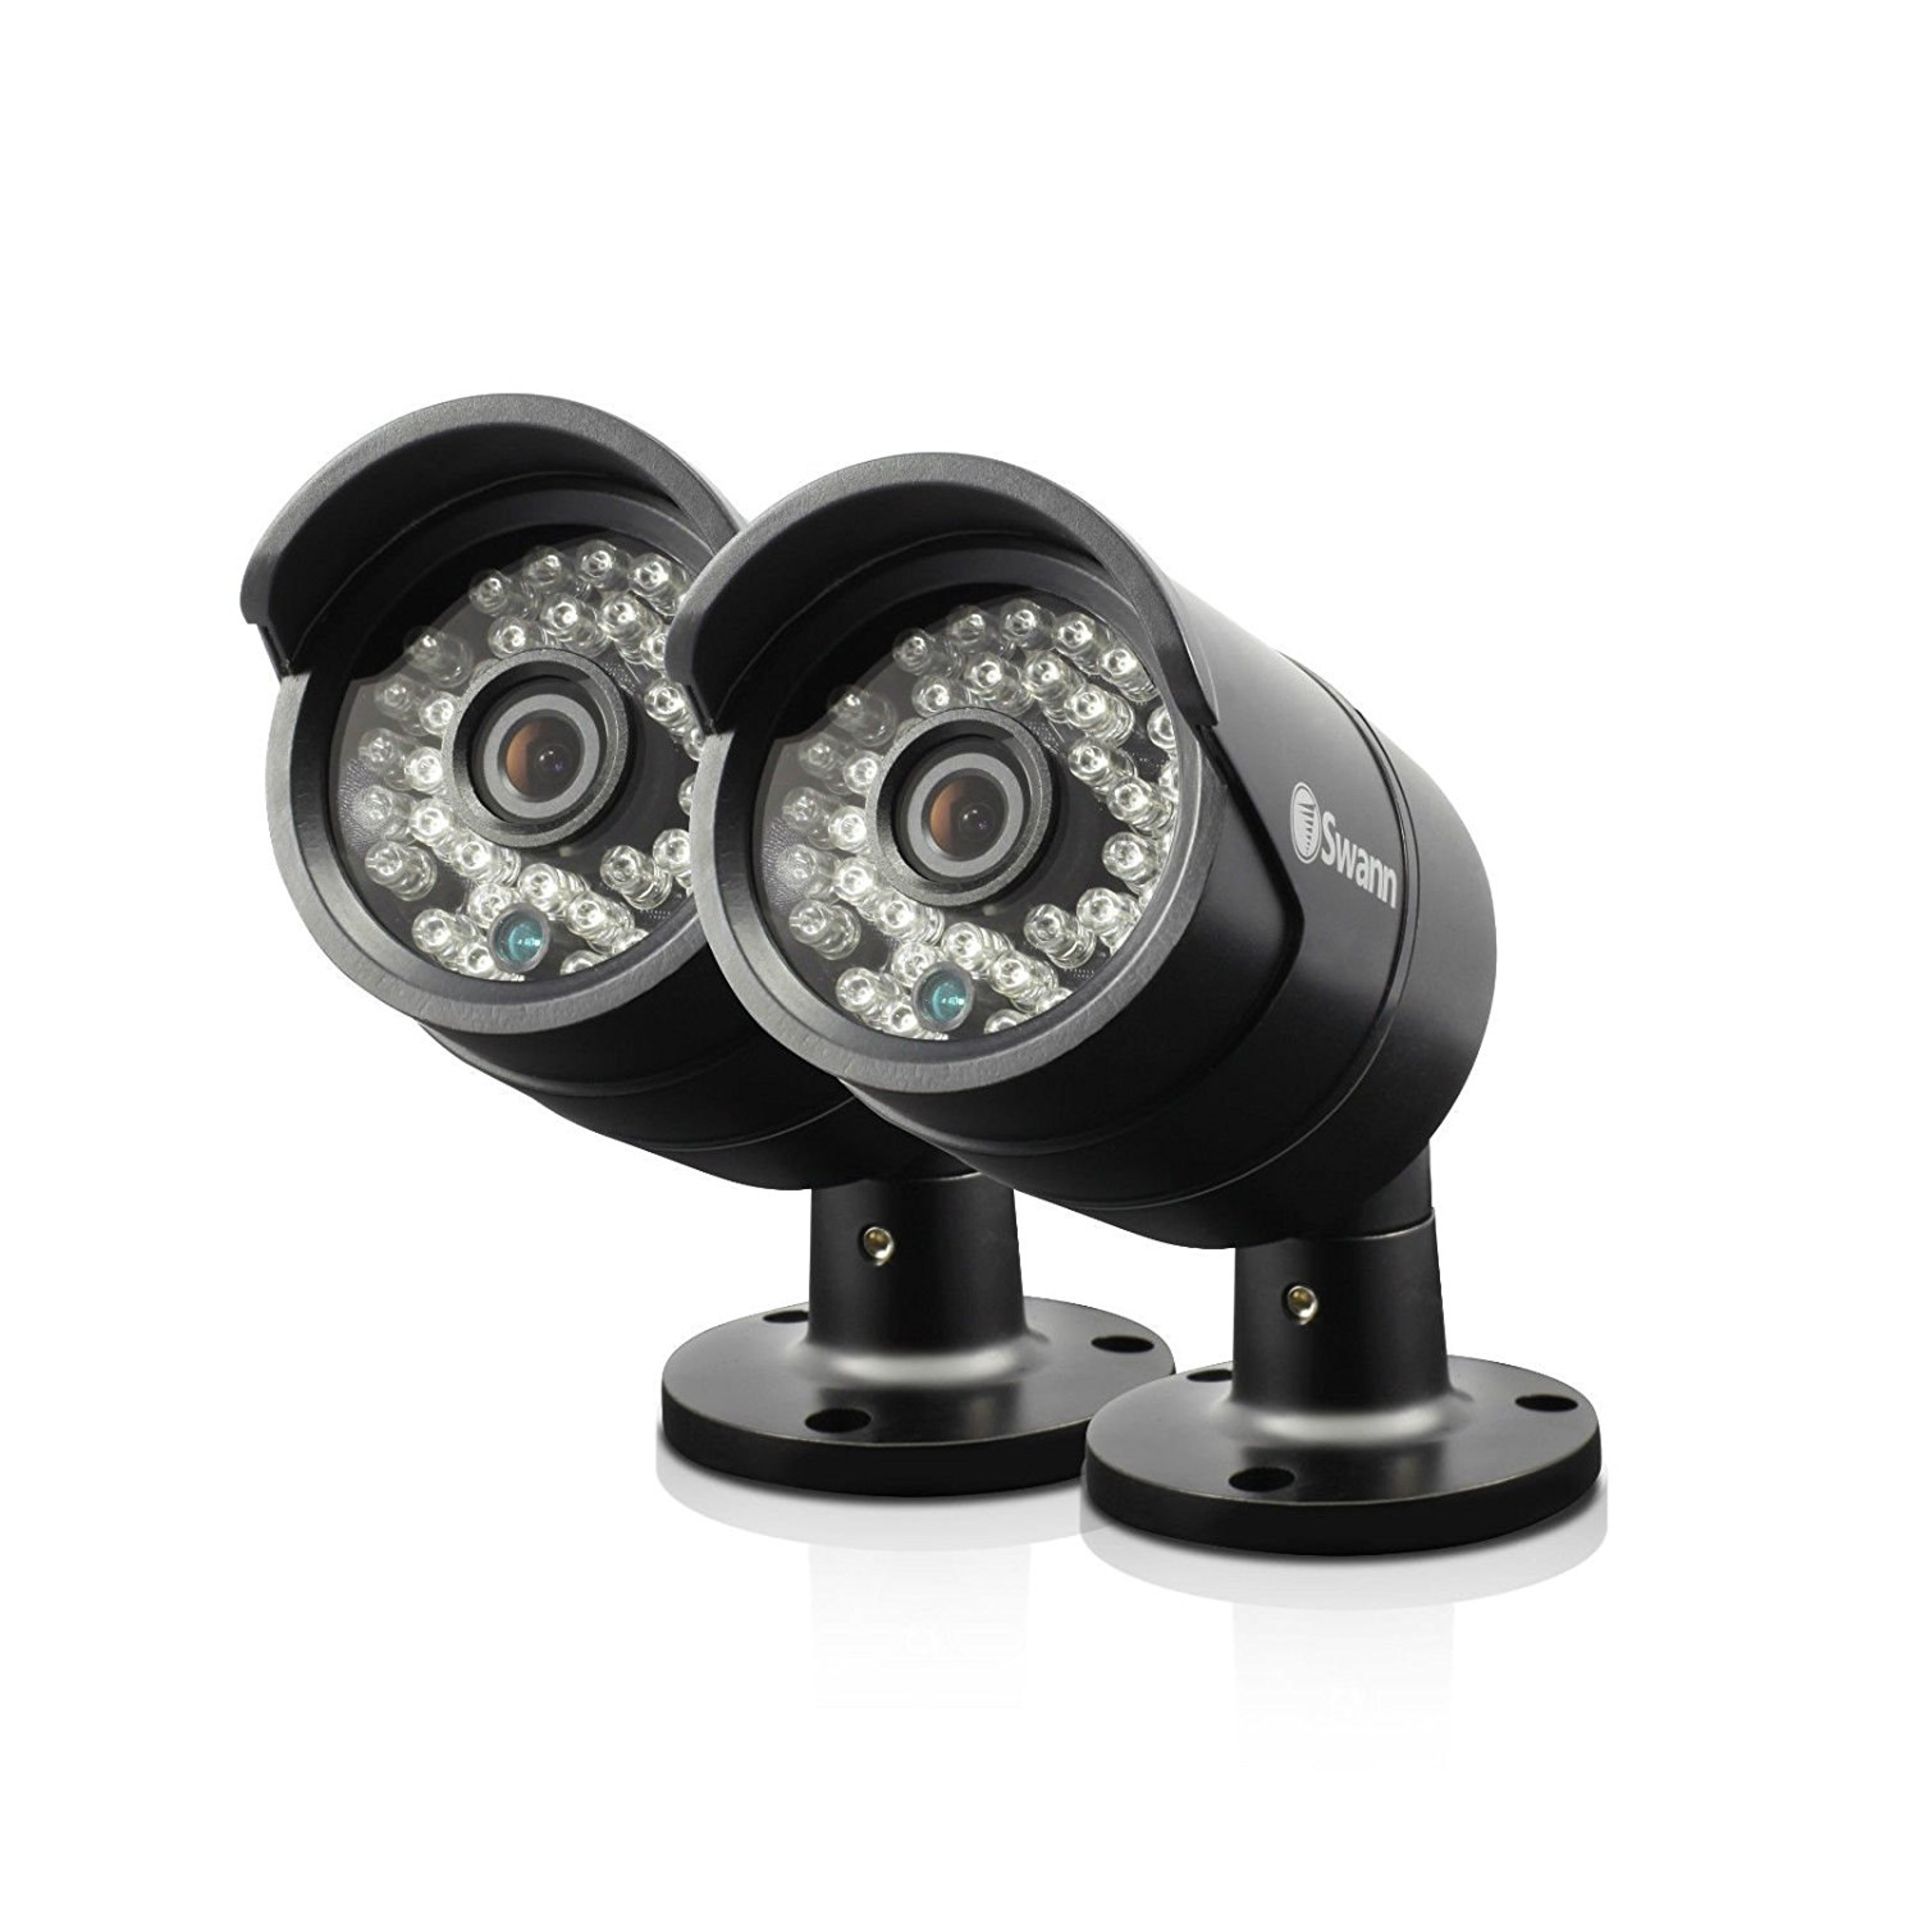 V Grade A Swann Pro A850 PK2 Twin Pack Multi-Purpose Day/Night Security Camera - Black X 2 YOUR